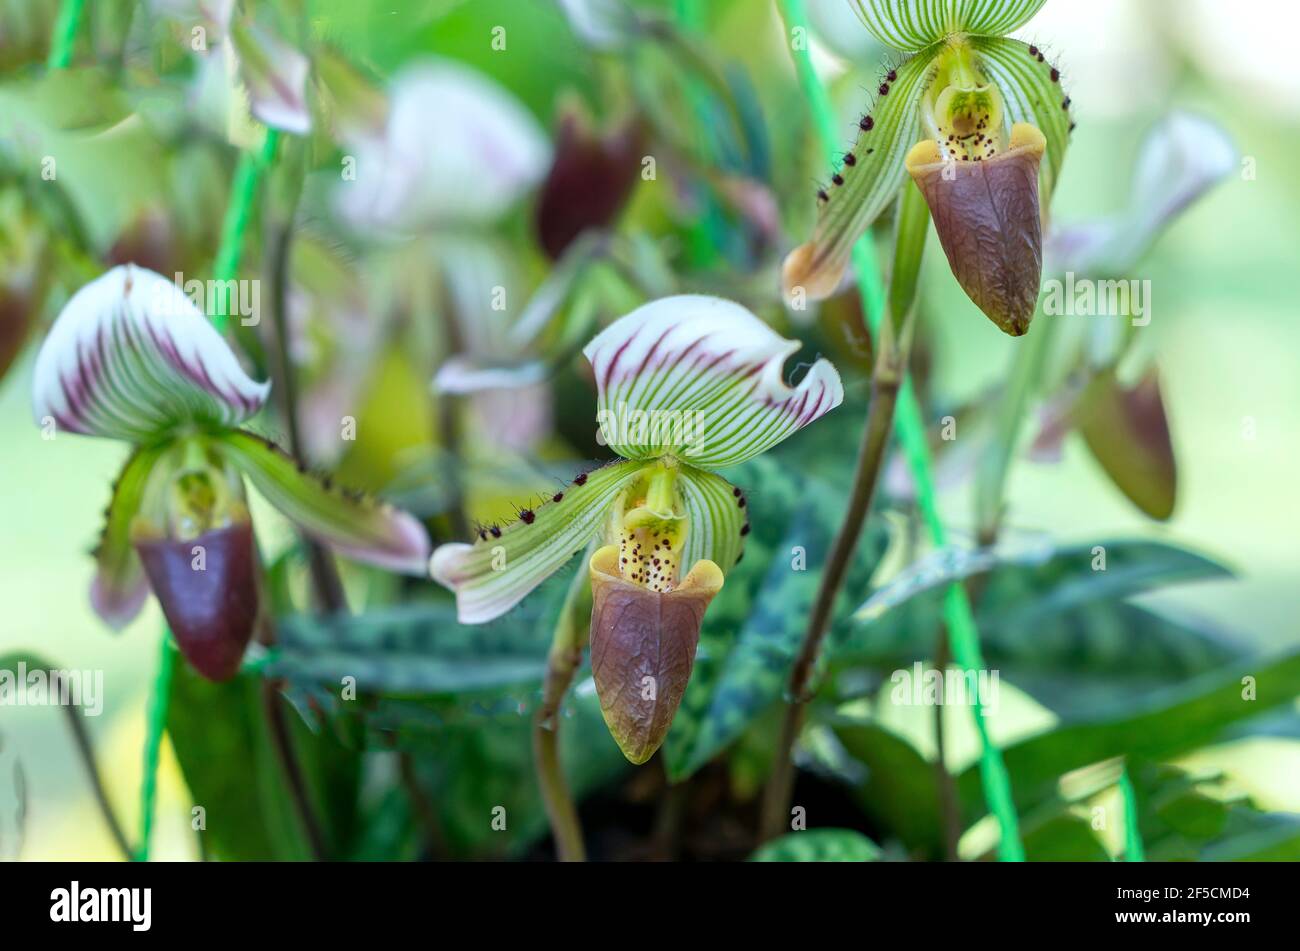 Paphiopedilum orchids flowers bloom in spring lunar new year 2021 adorn the beauty of nature, a rare wild orchid decorated in tropical gardens Stock Photo